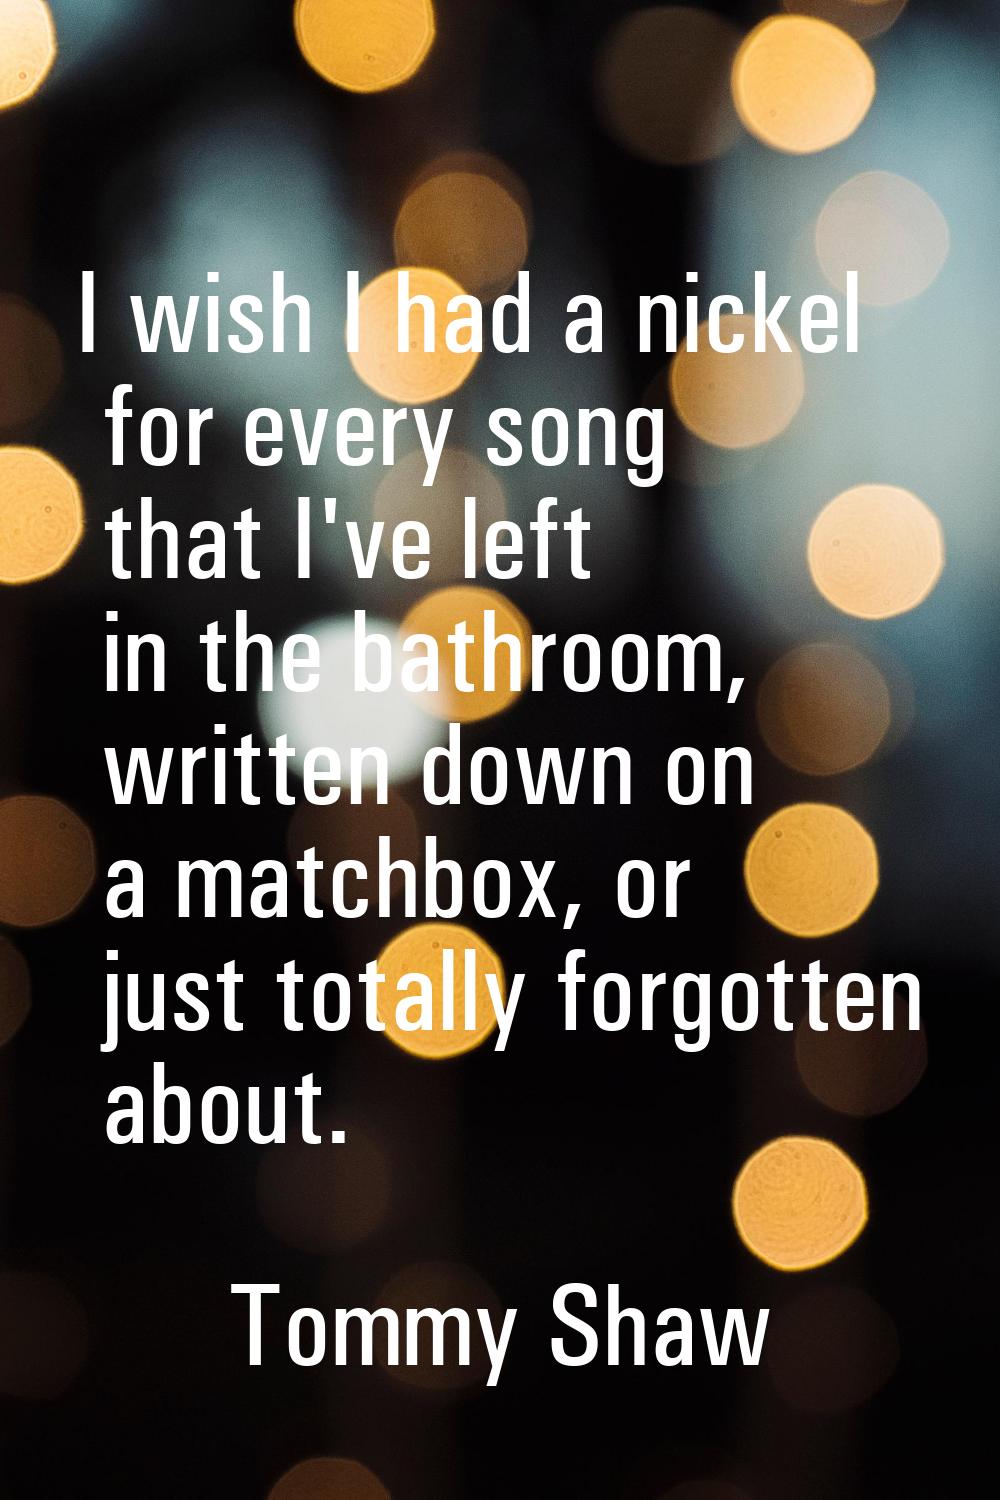 I wish I had a nickel for every song that I've left in the bathroom, written down on a matchbox, or